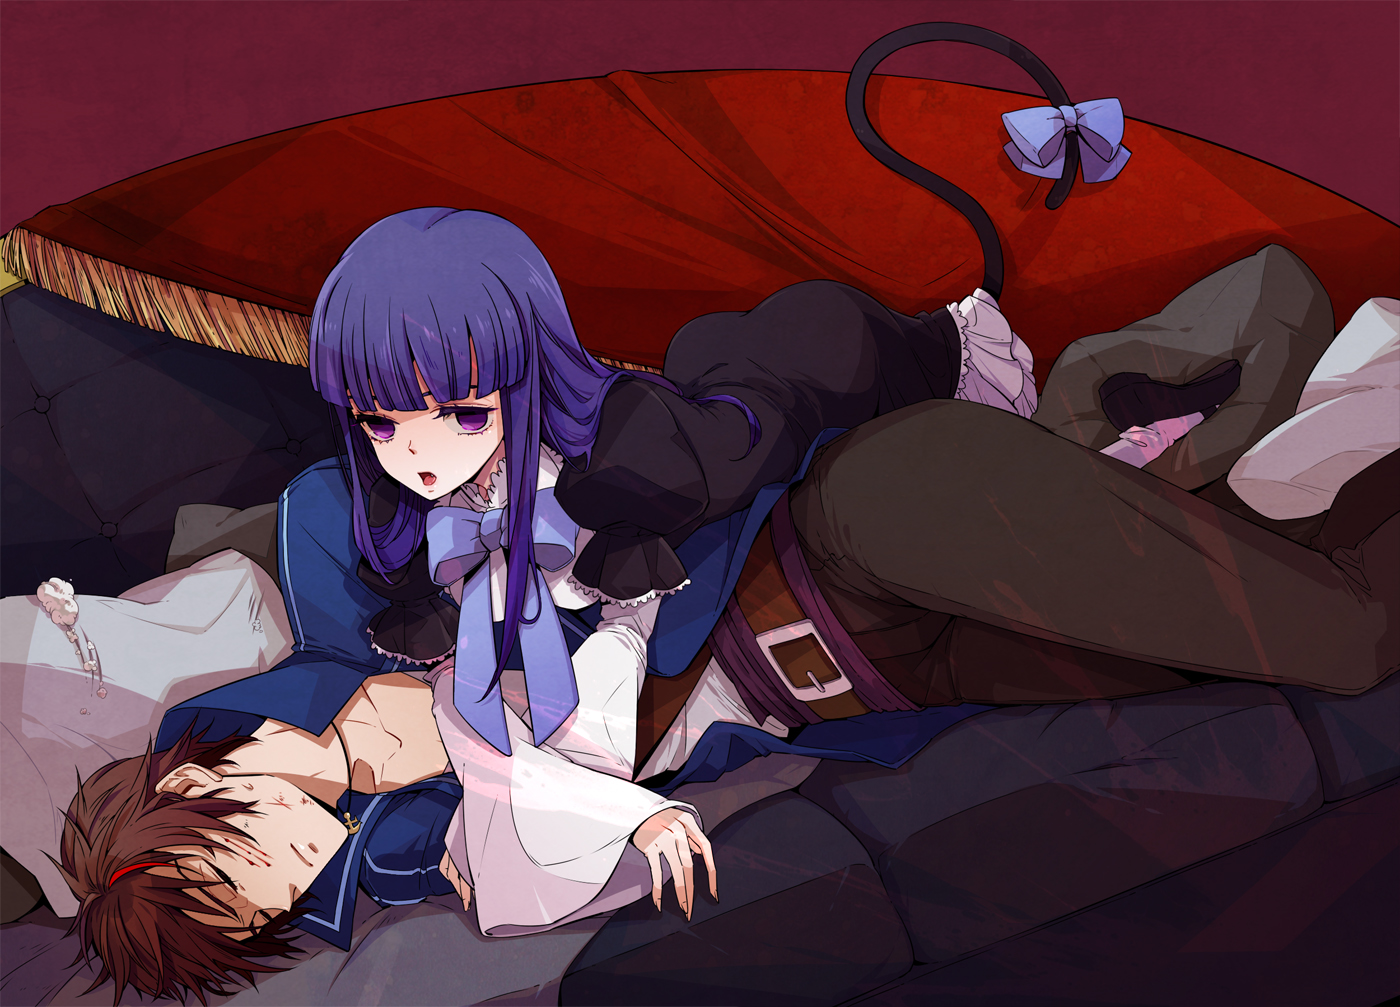 Umineko: When They Cry desktop wallpaper featuring Frederica & Willard, from the anime series.